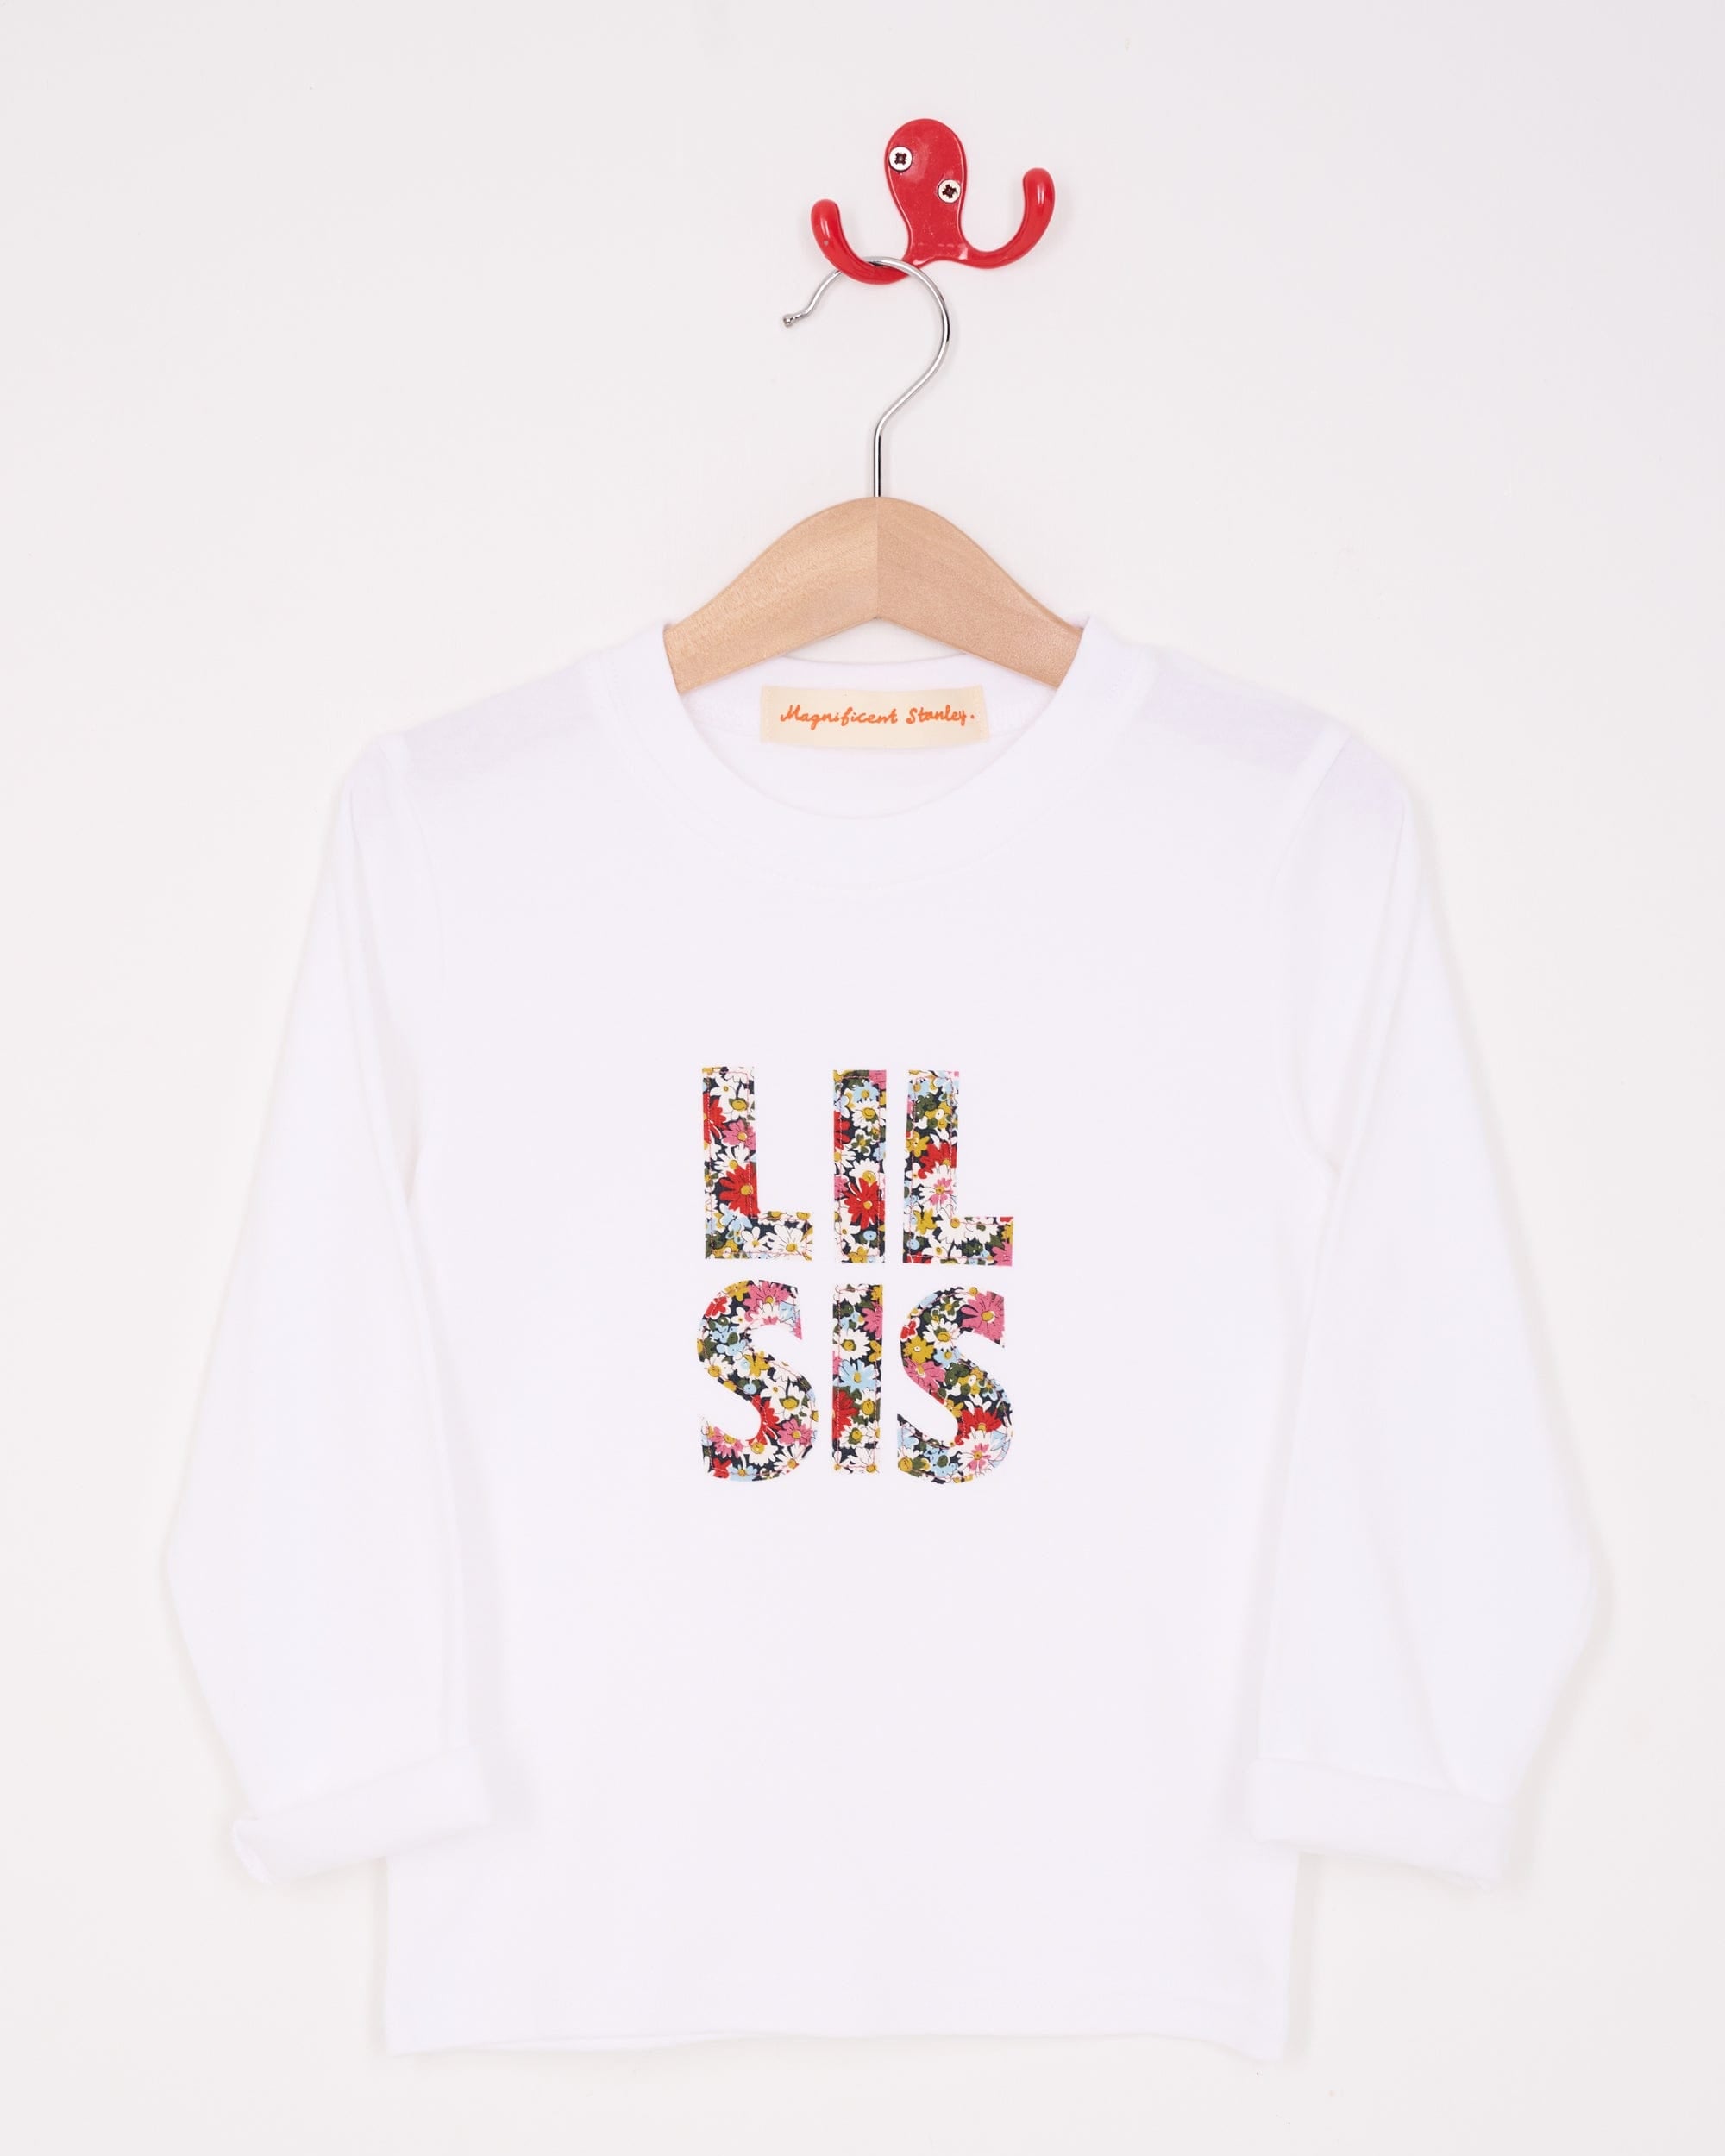 Magnificent Stanley Tee LIL' SIS T-Shirt in Choice of Liberty Print